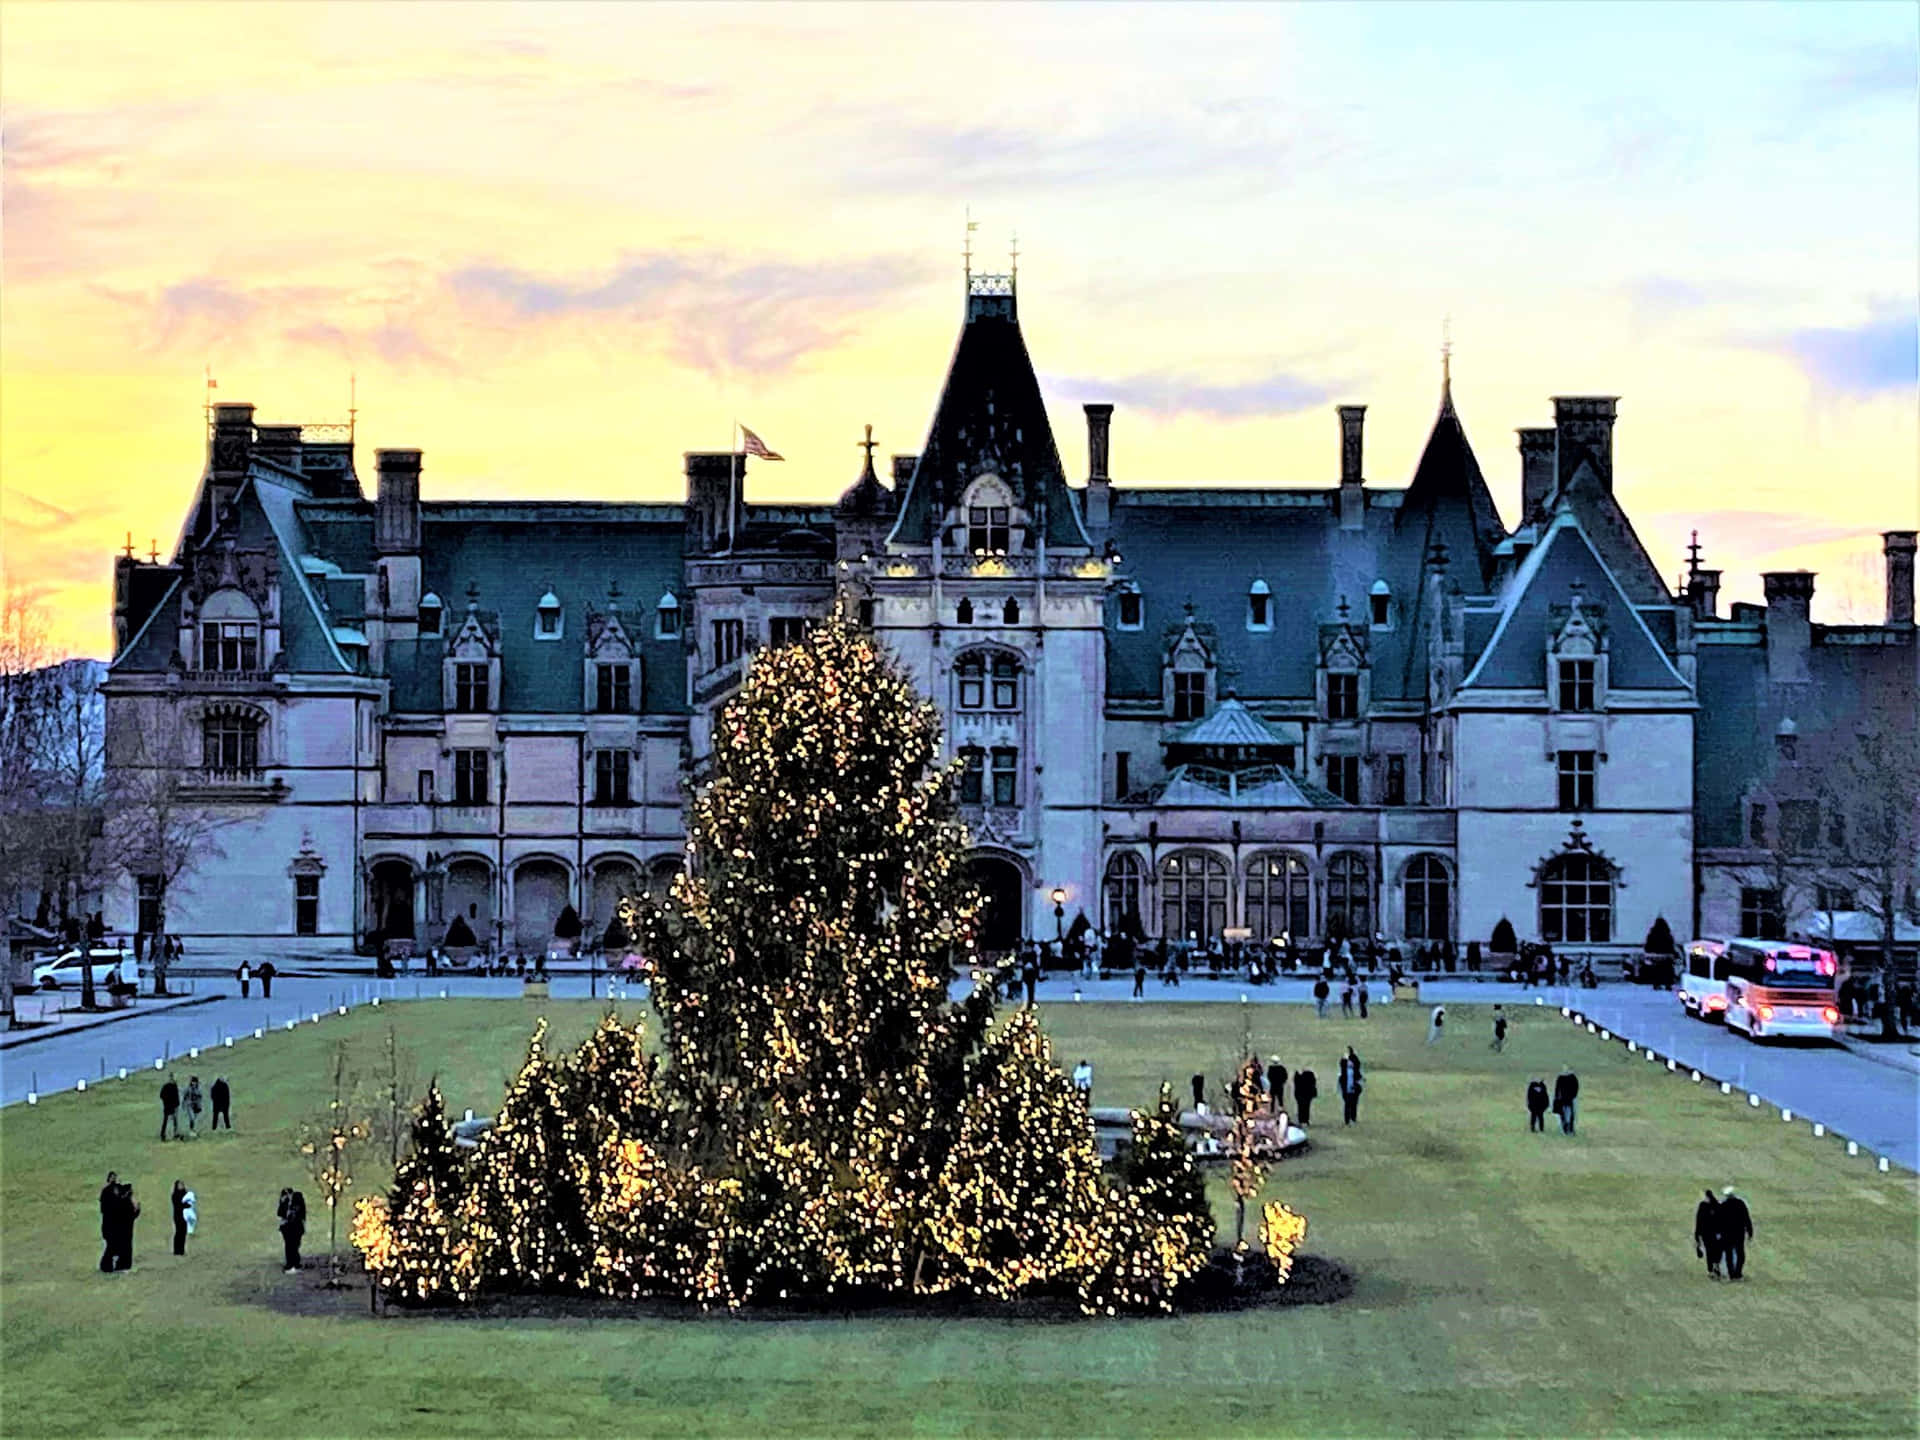 Biltmore Christmas Tree In Front Of A Castle